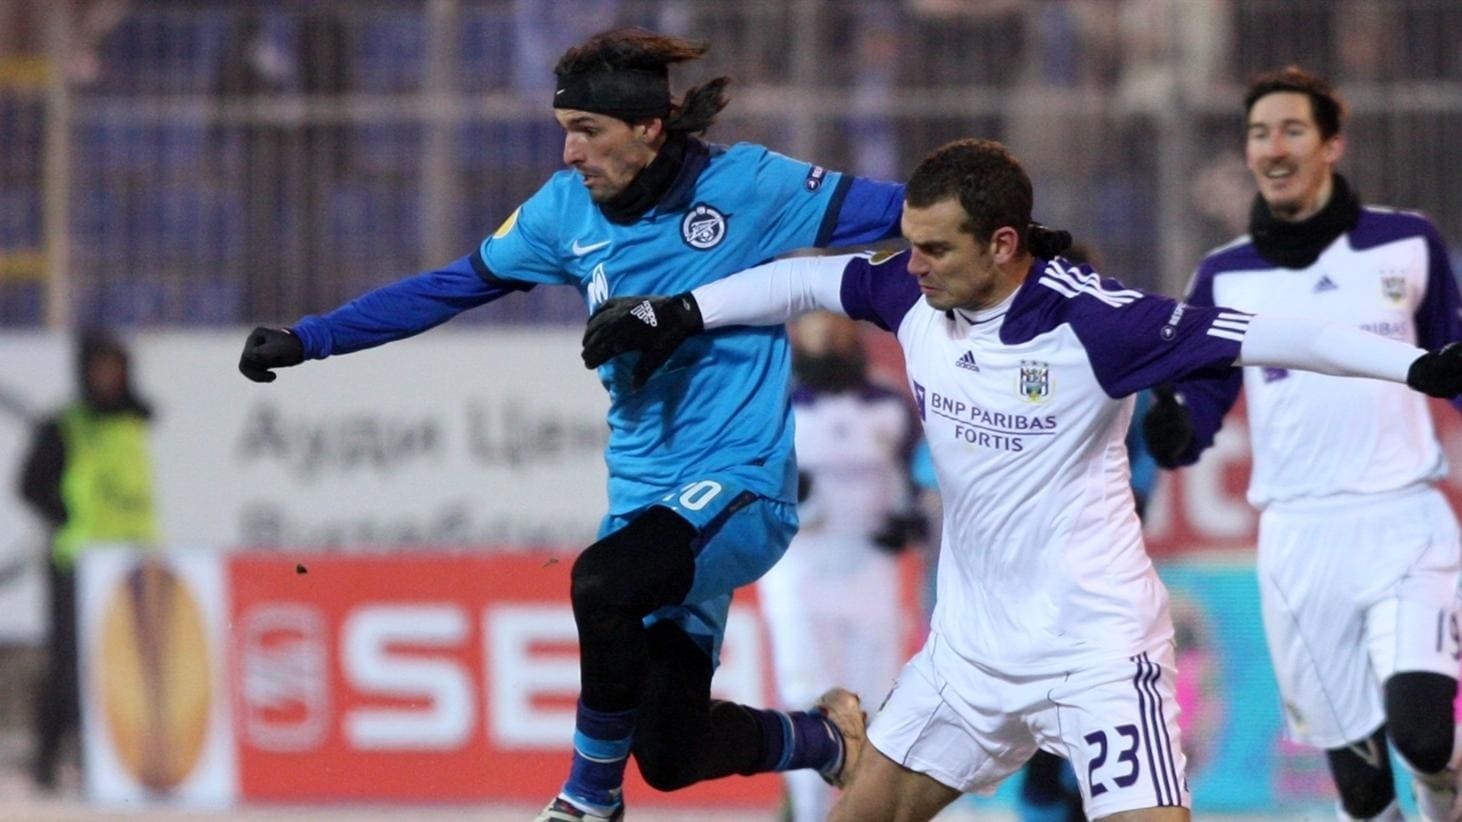 History gives Zenit hope against Anderlecht, UEFA Champions League